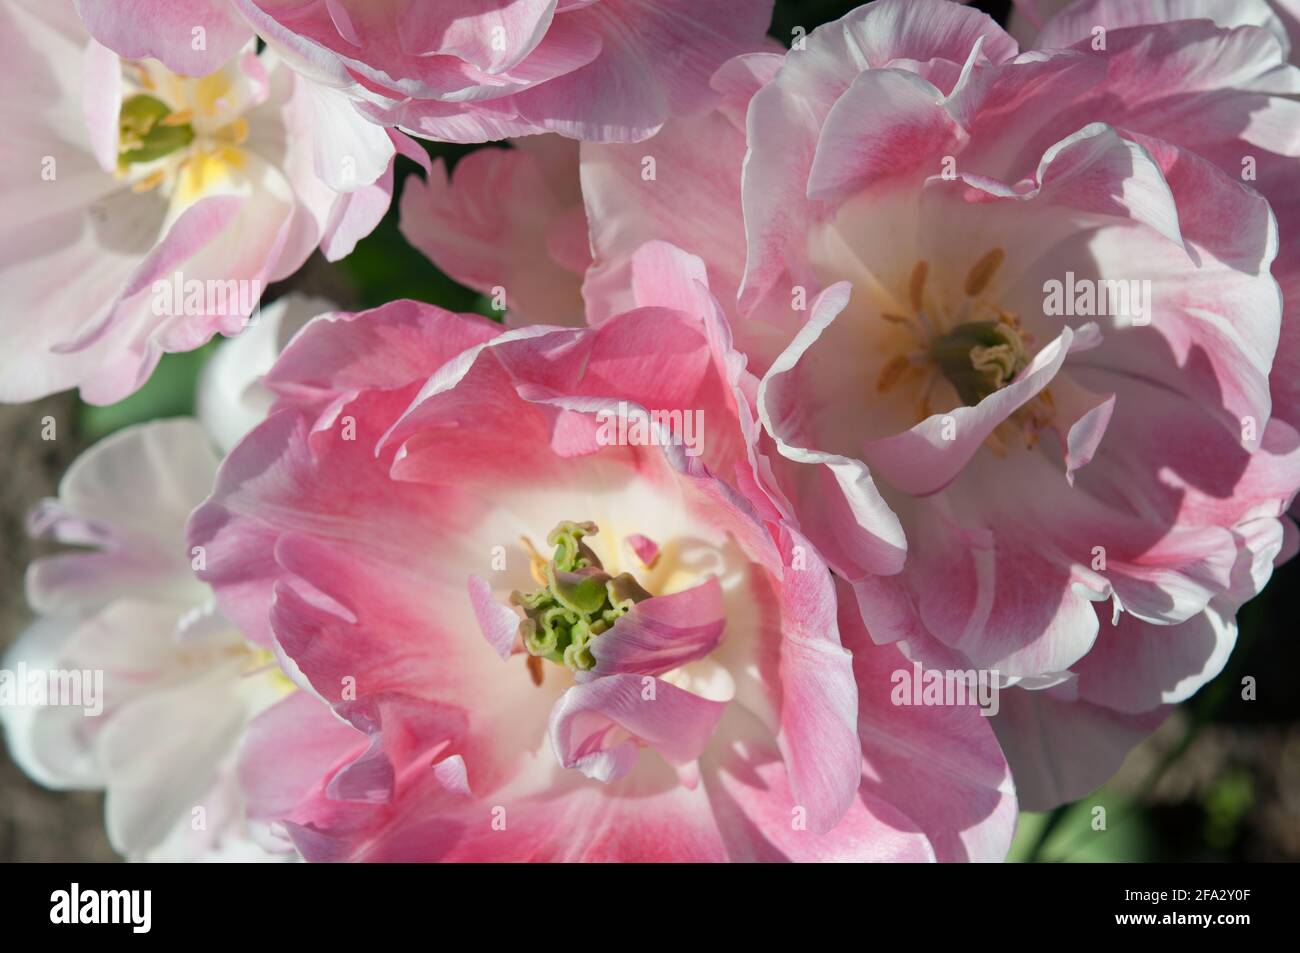 double late peony tulips 'angelique' - landscape orientation,  close up detail of flowers Stock Photo